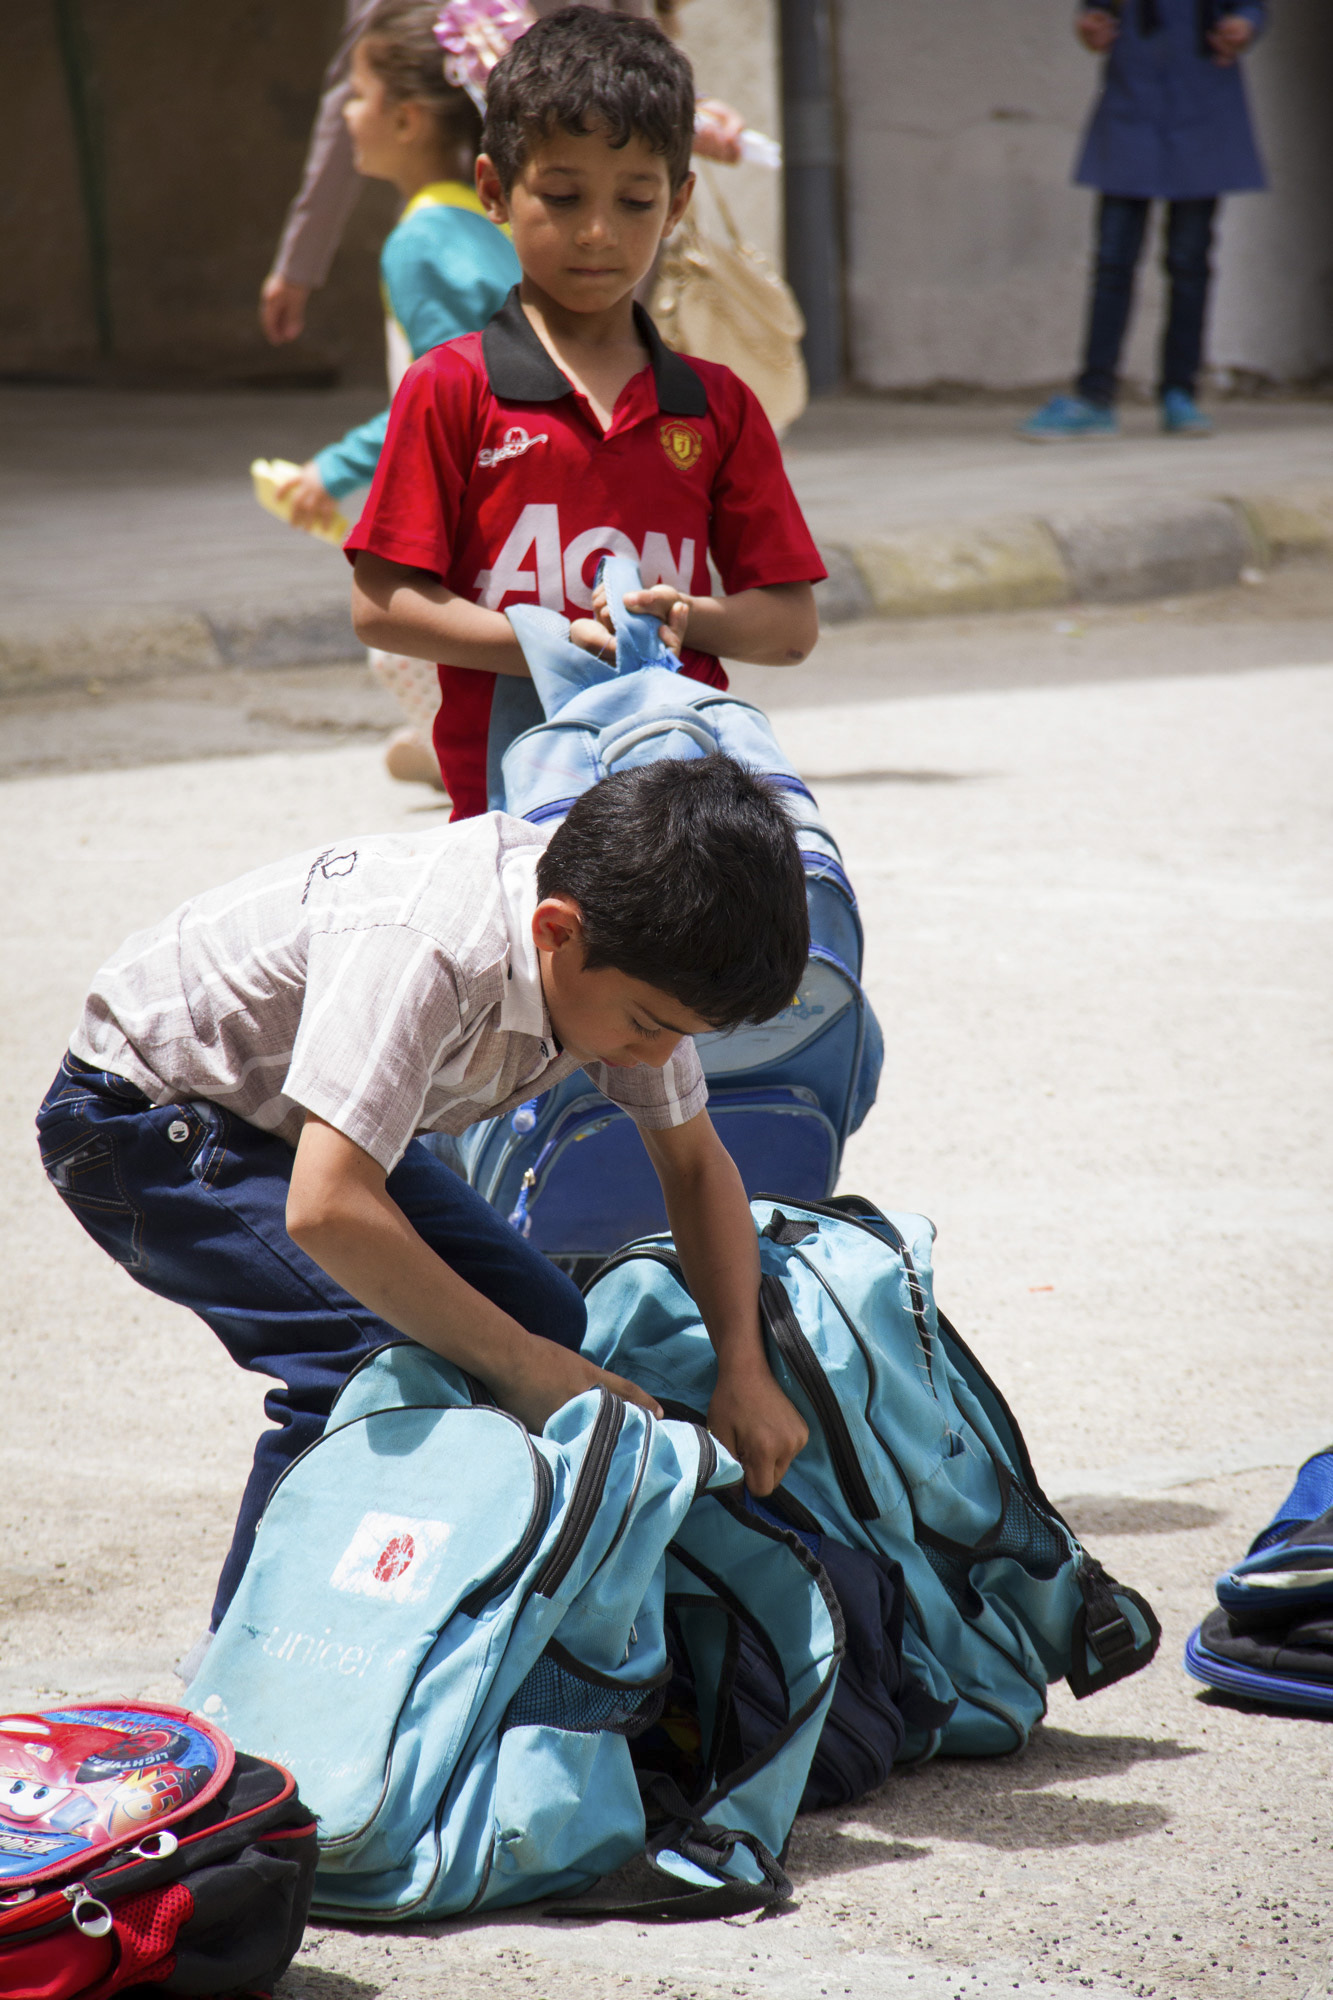 Most of the Syrian refugee students have a UNICEF school bag. They depend on the help of international organizations to participate in school life.